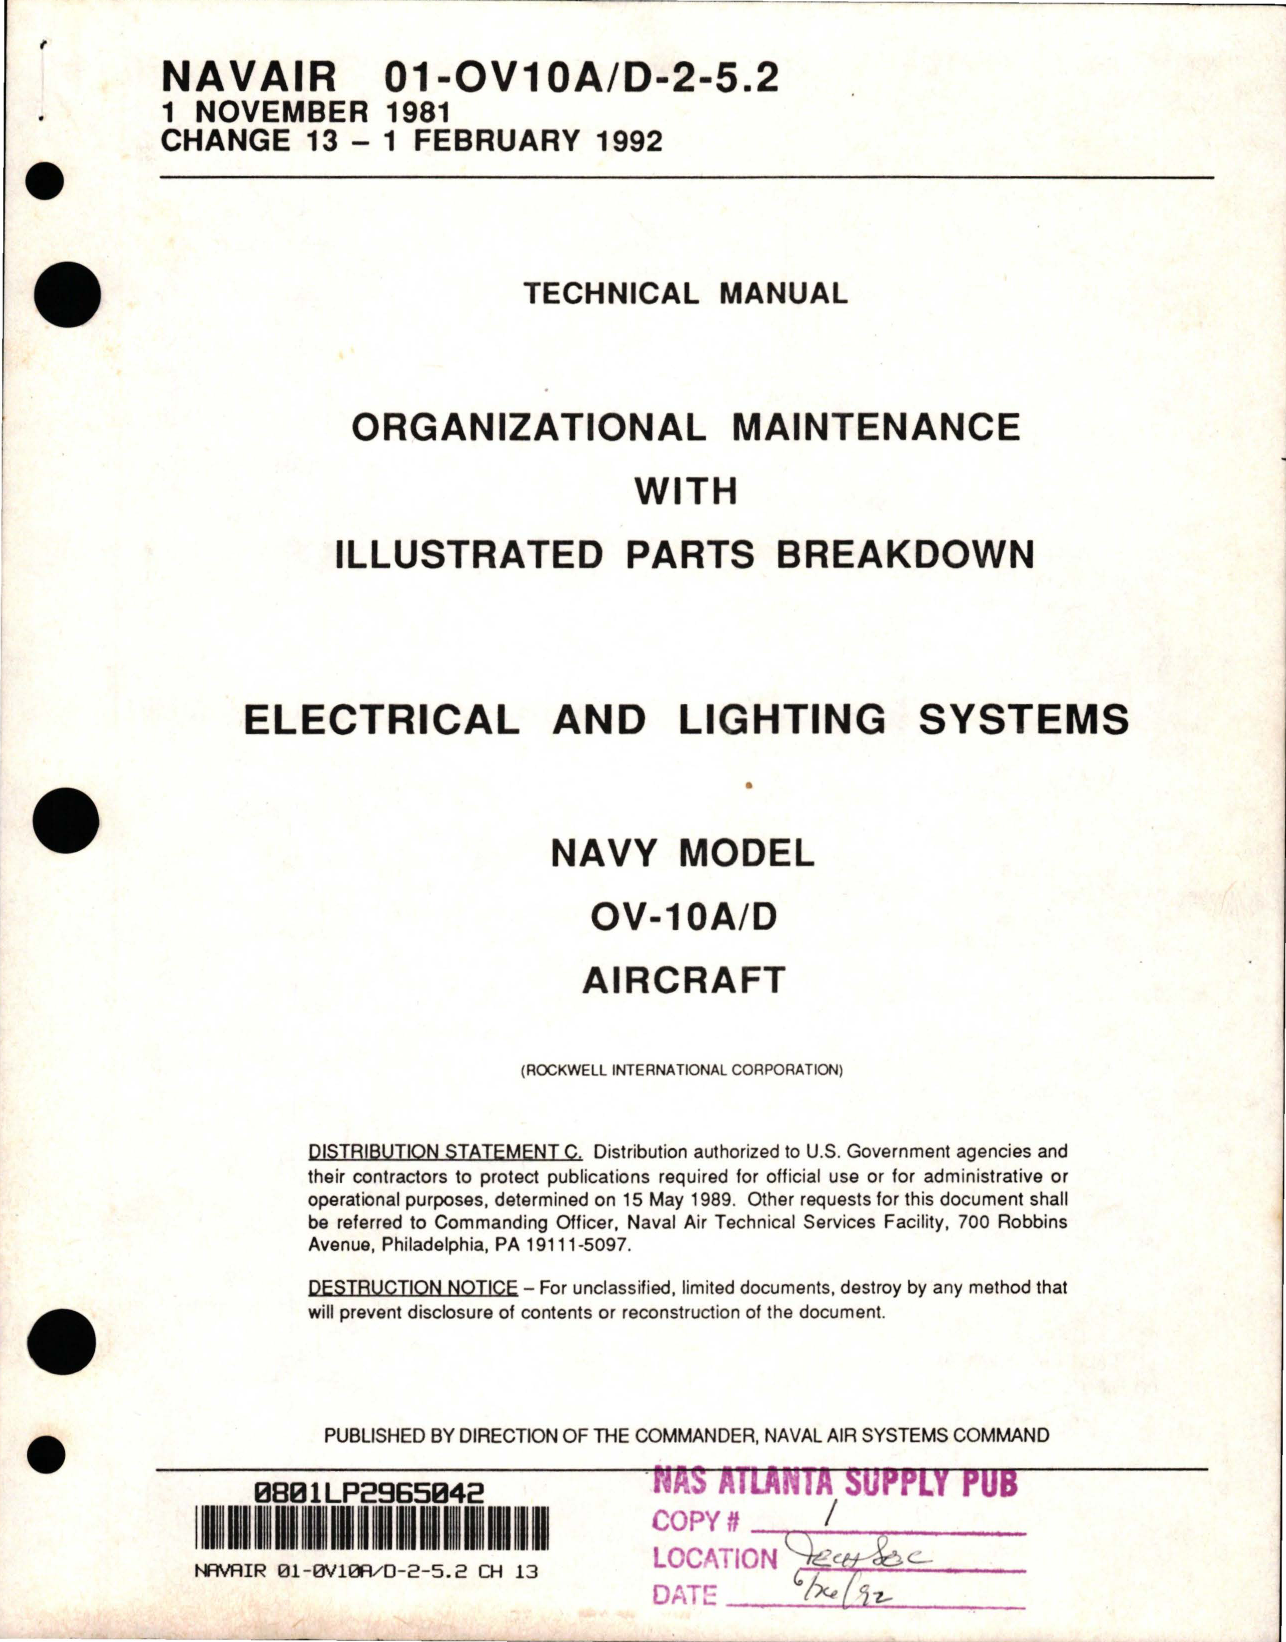 Sample page 1 from AirCorps Library document: Organizational Maintenance with Illustrated Parts Breakdown for Electrical and Lighting Systems for OV-10A/D